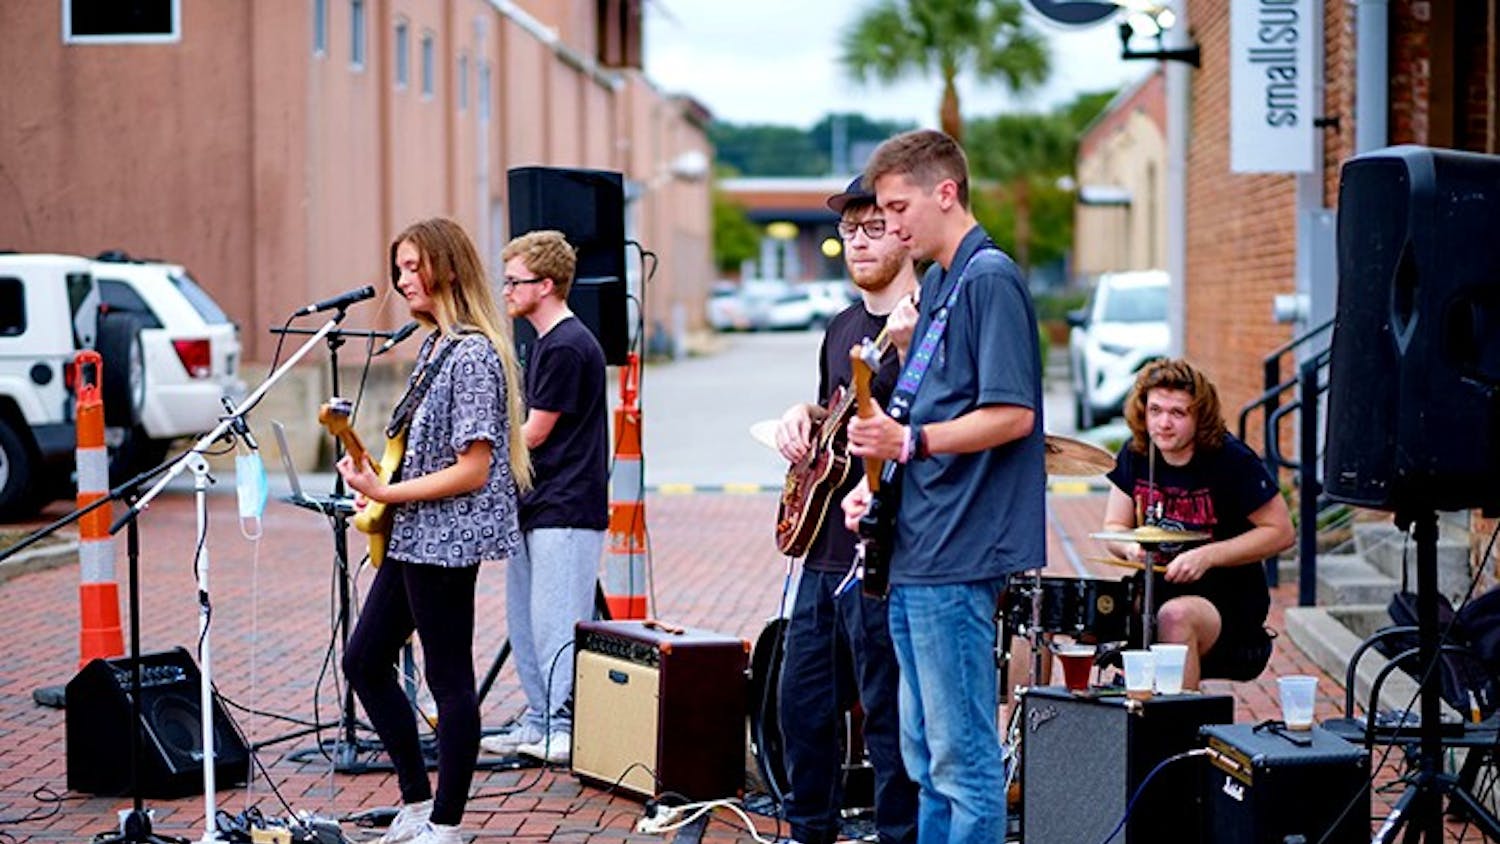 Outer Ego performs an outdoor show at Twisted Spur Brewing in September 2020. The band will be performing again at Twisted Spur Brewing on Nov. 20 and at Market on Main on Dec. 10. 